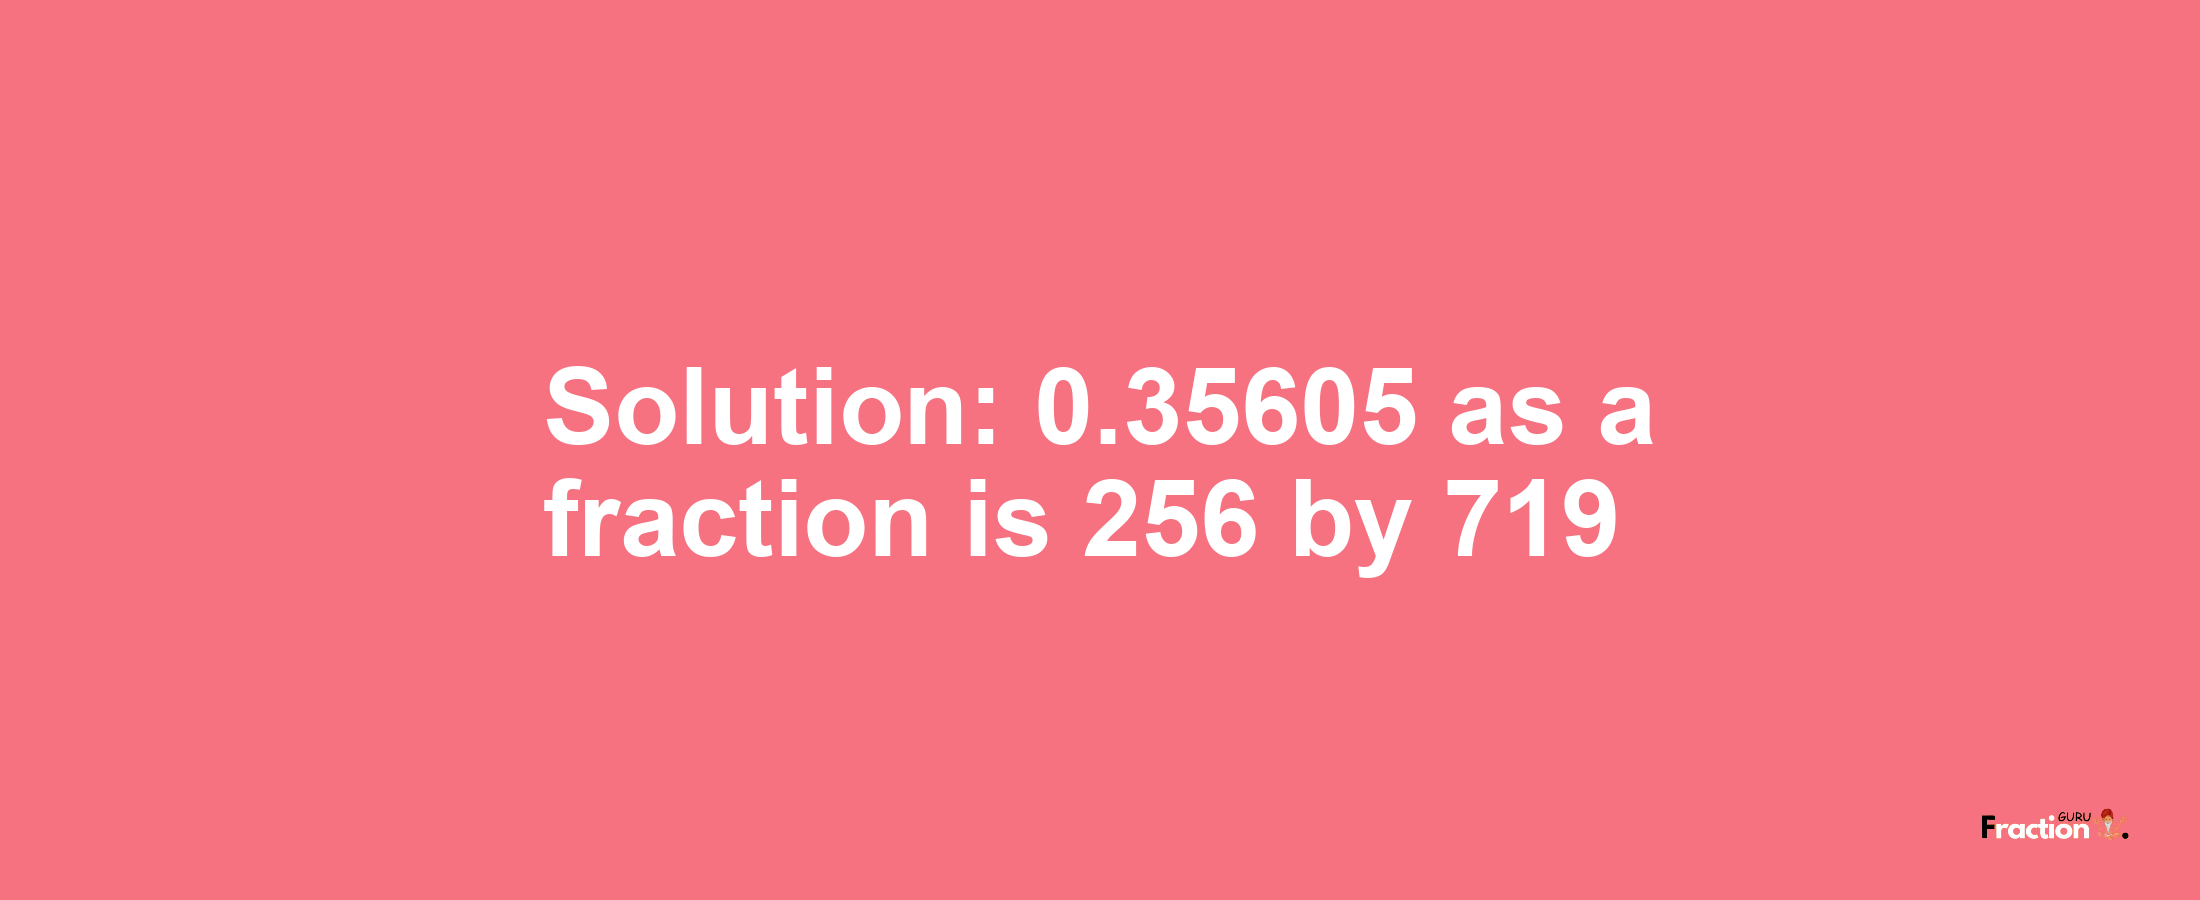 Solution:0.35605 as a fraction is 256/719